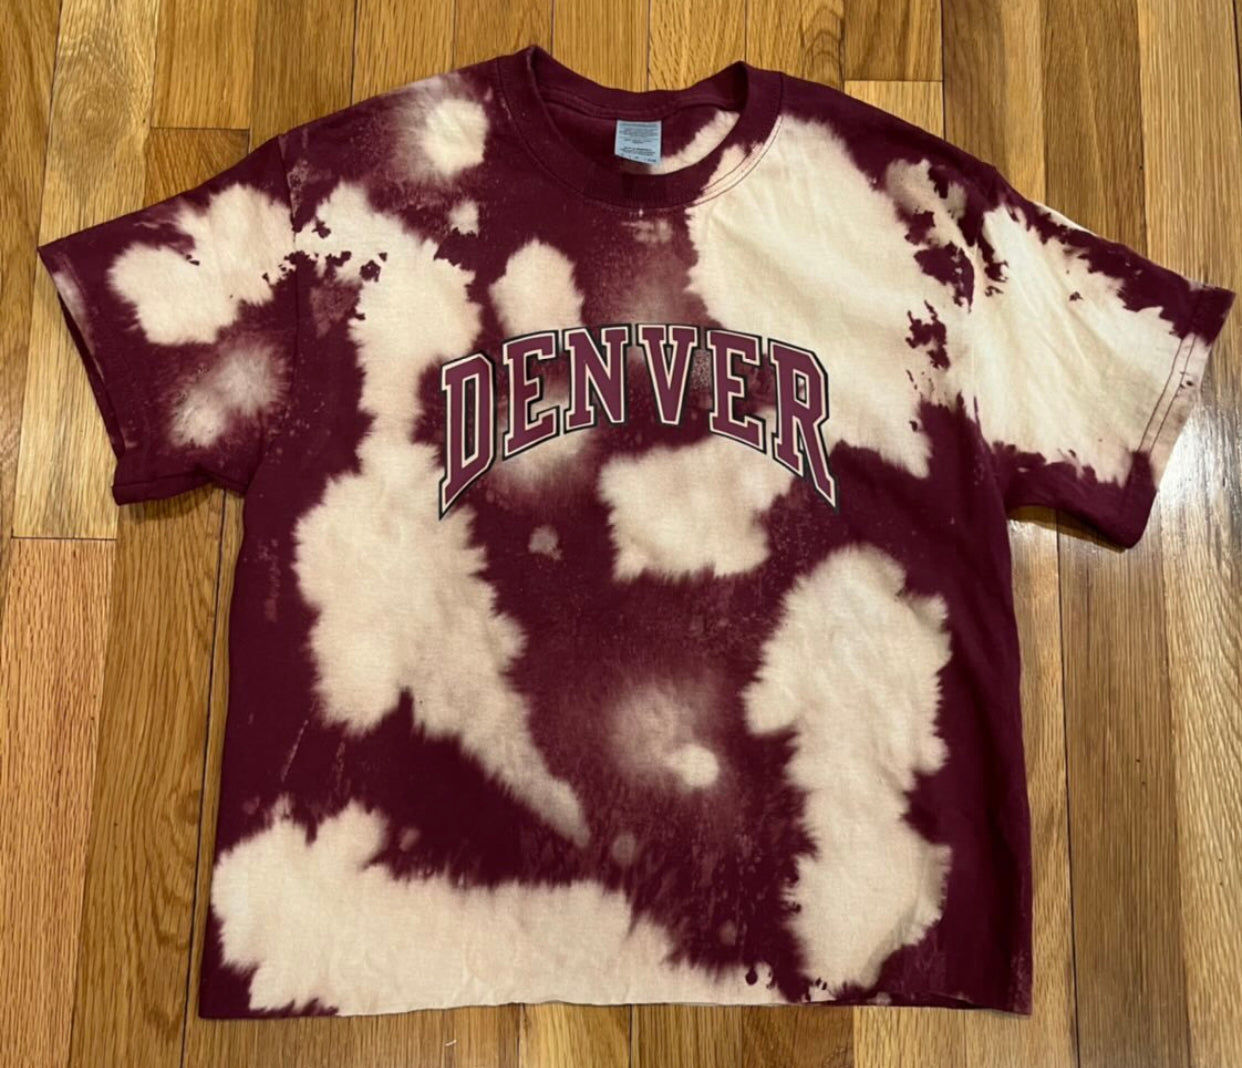 Custom college bleached or non bleached crop tee (can make for any school)